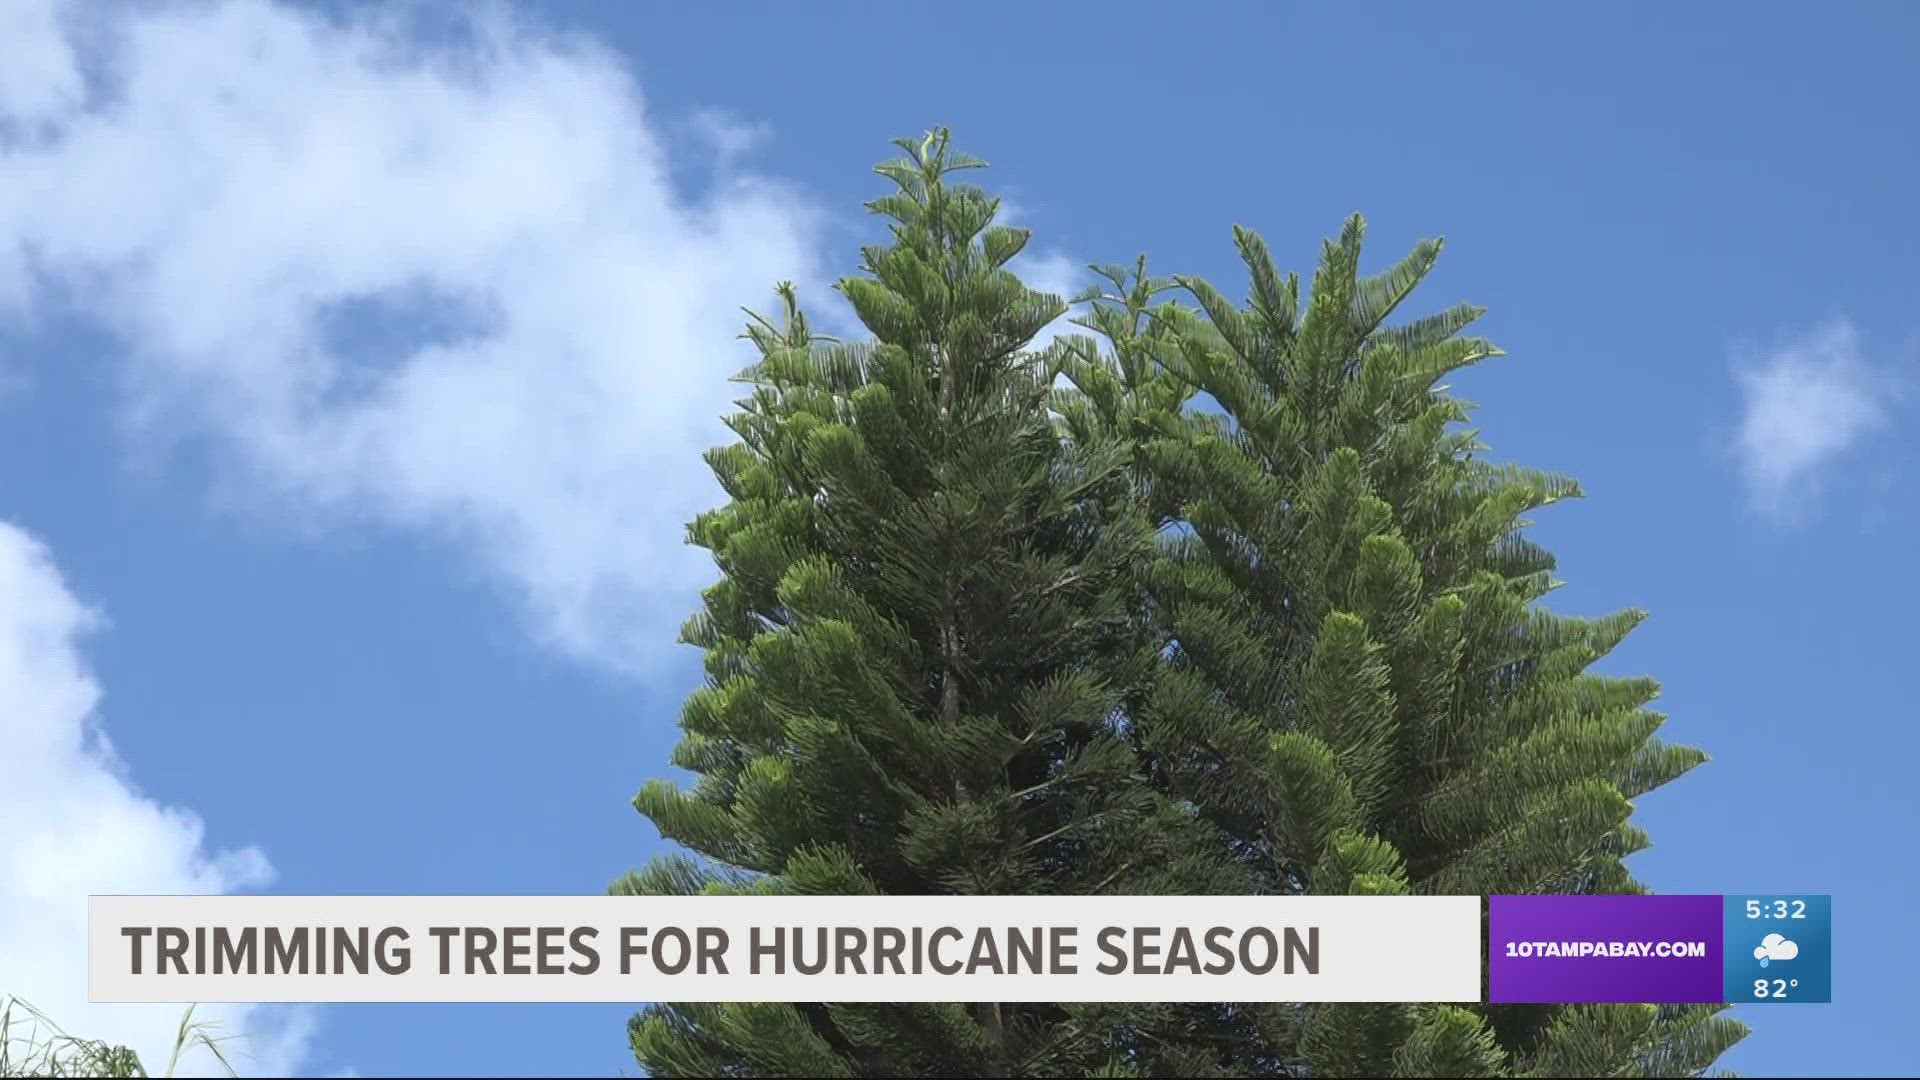 Experts said homeowners must take every safety concern seriously and should not wait until a hurricane is on the horizon to do tree preparations